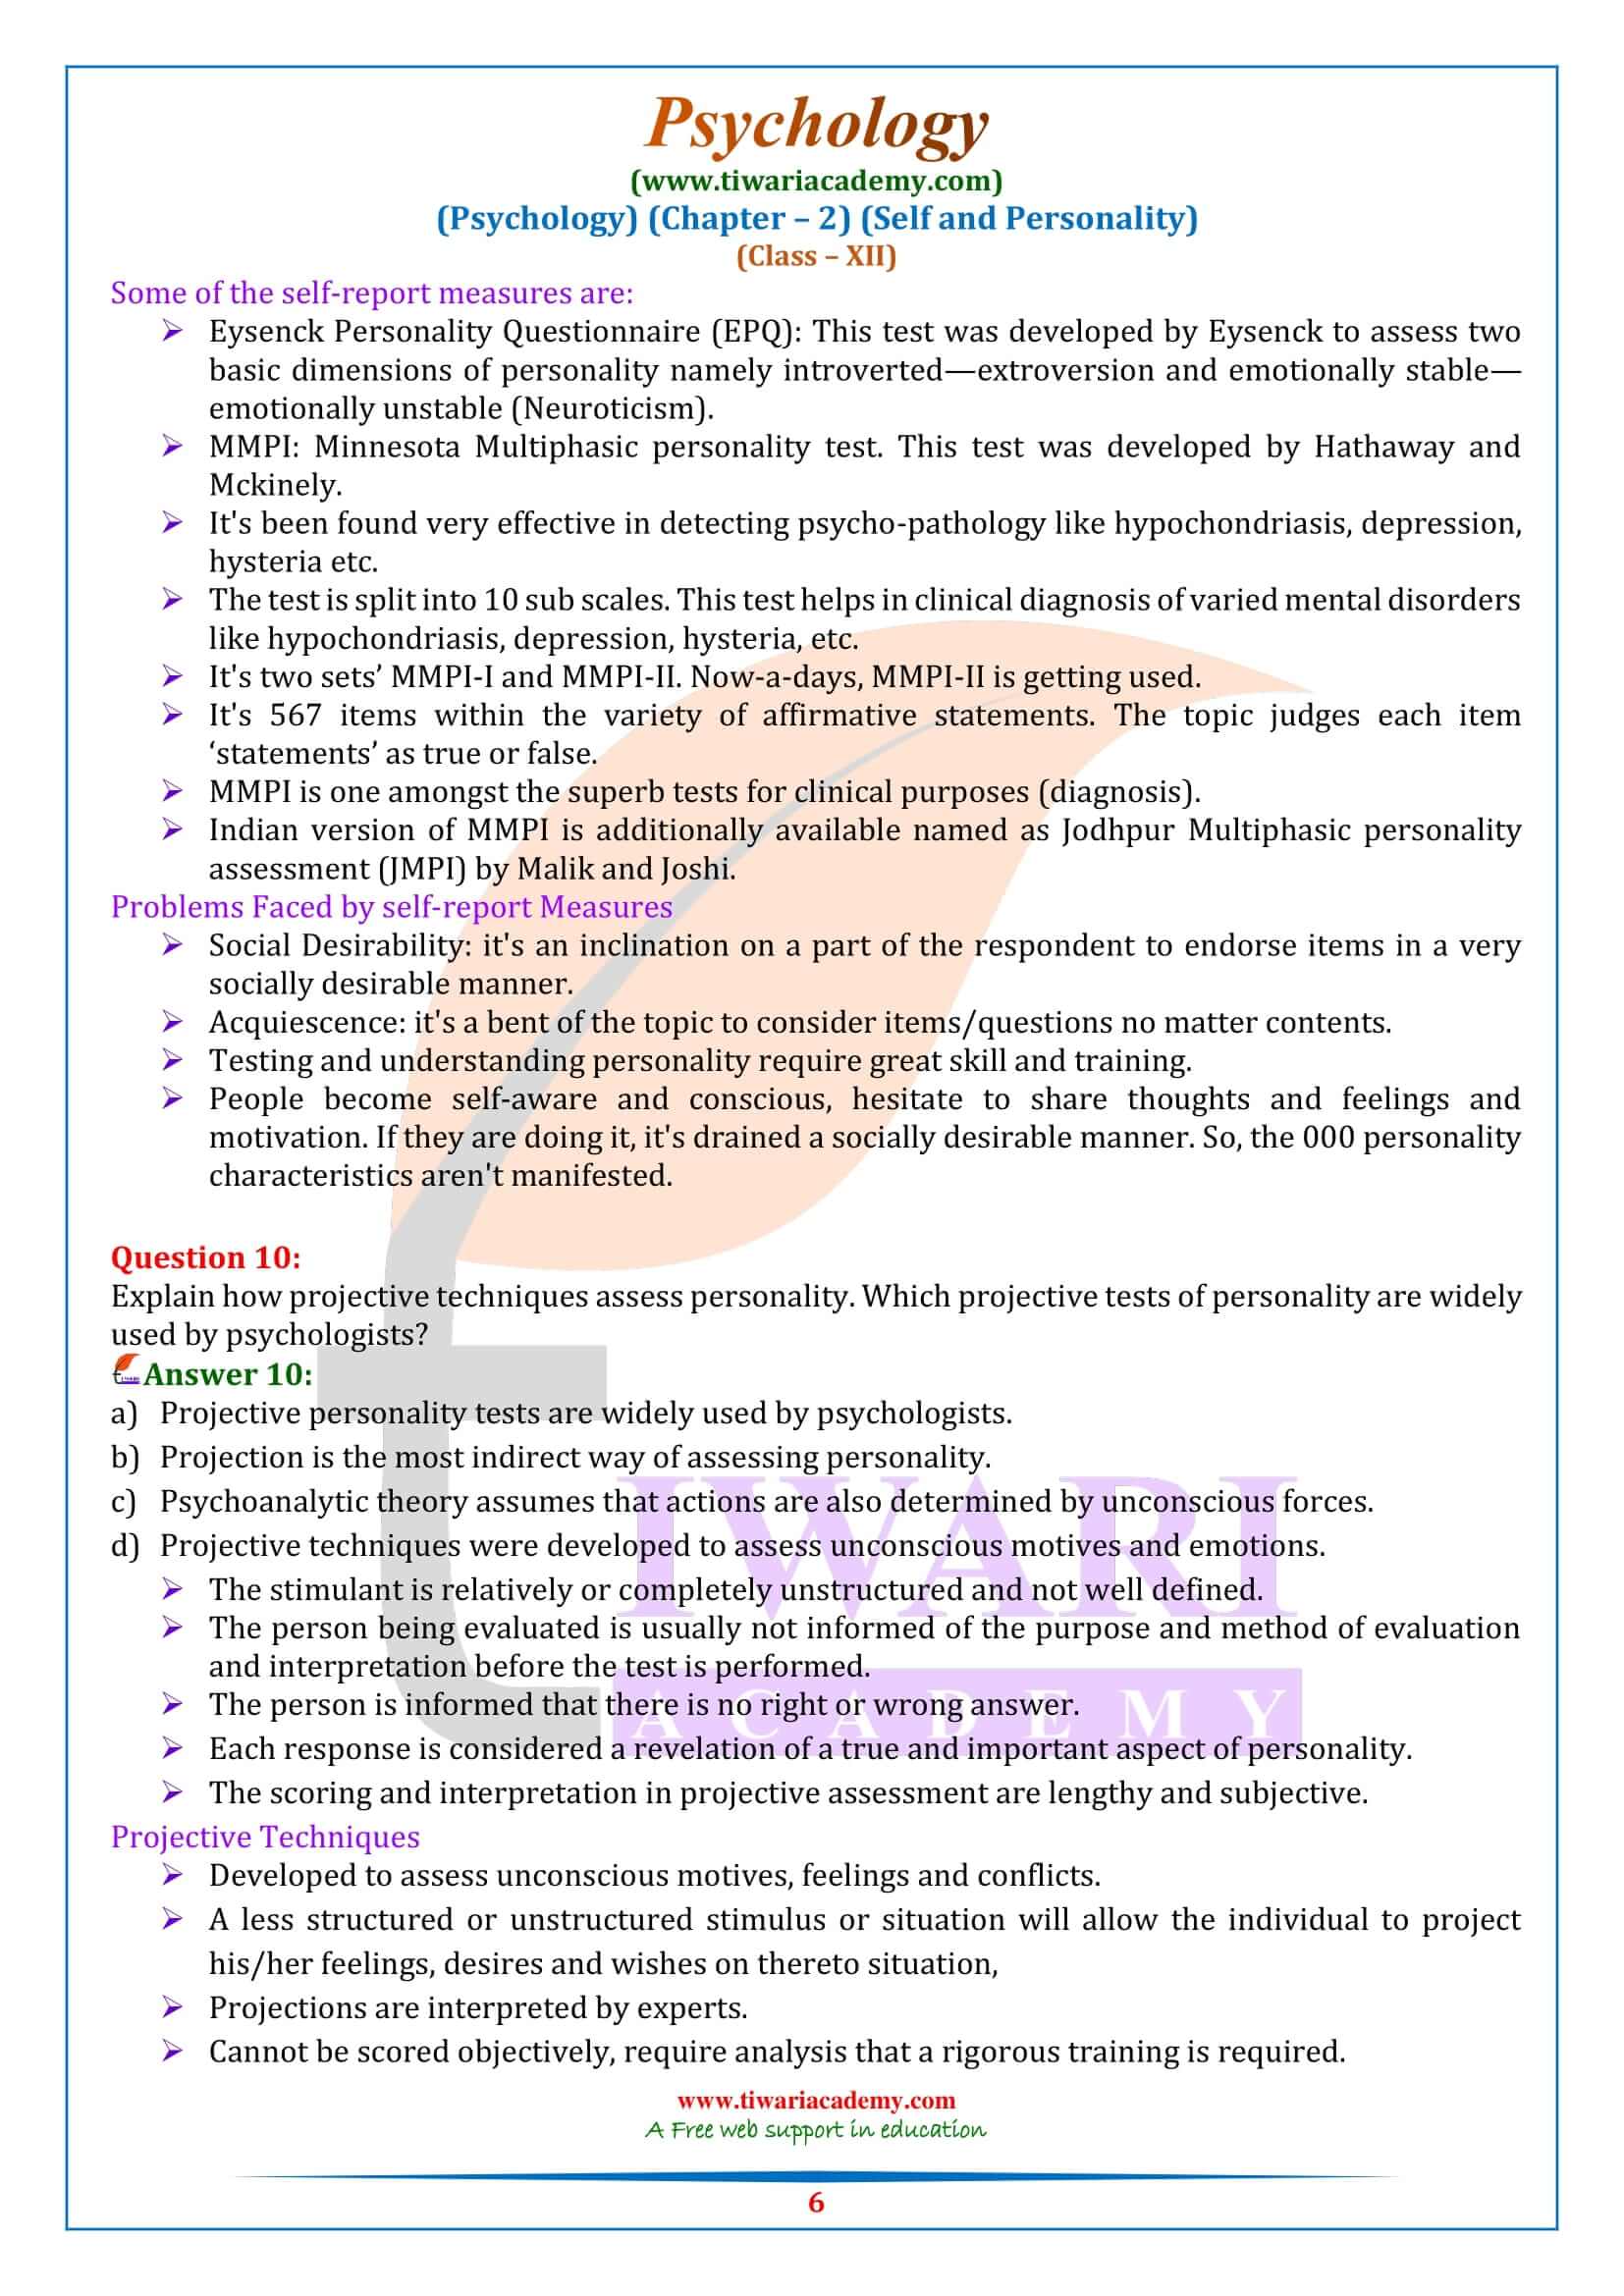 NCERT Solutions for Class 12 Psychology Chapter 2 free